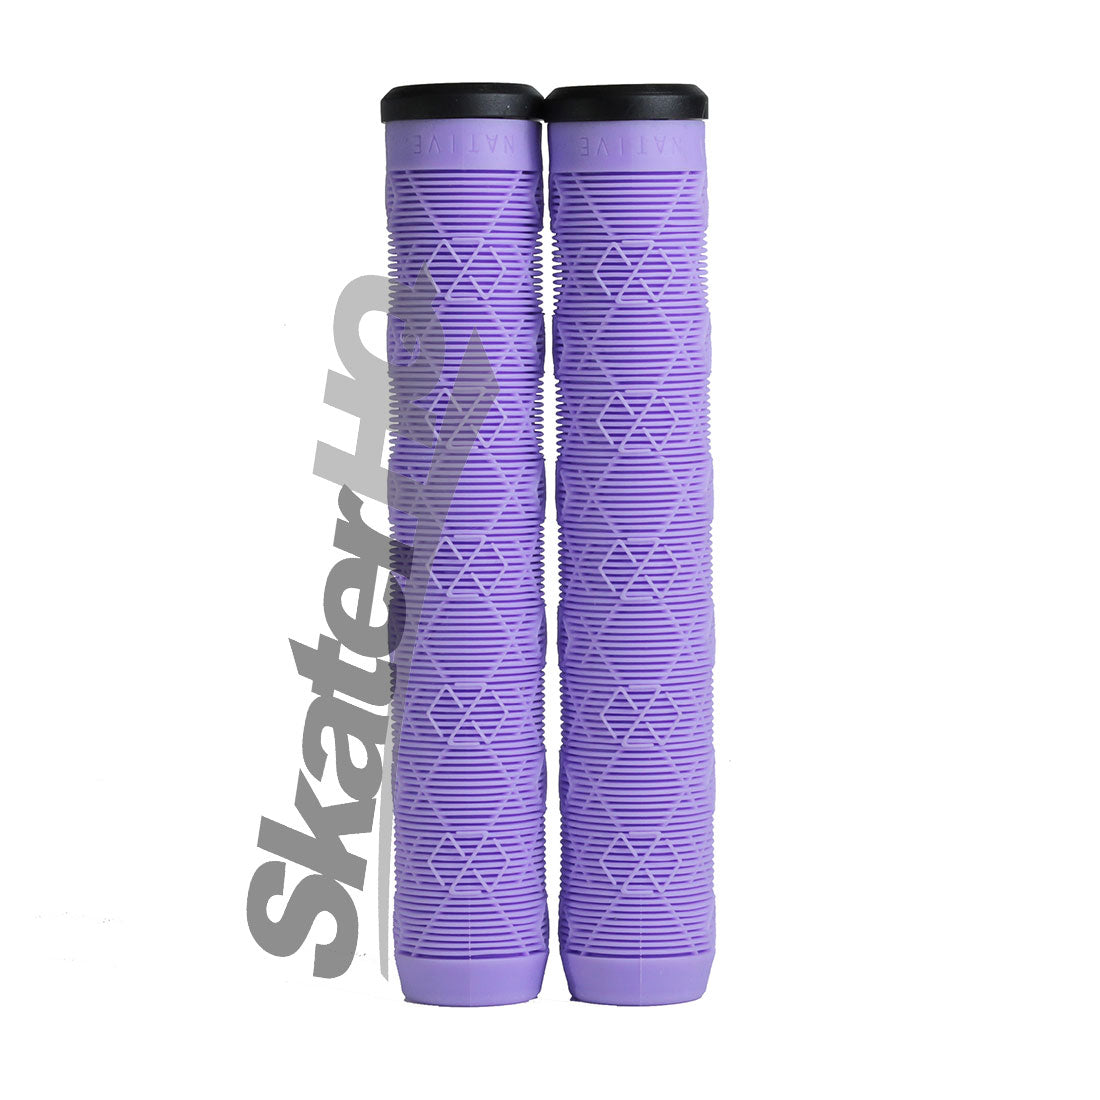 Native Emblem Grips - Lilac Scooter Grips